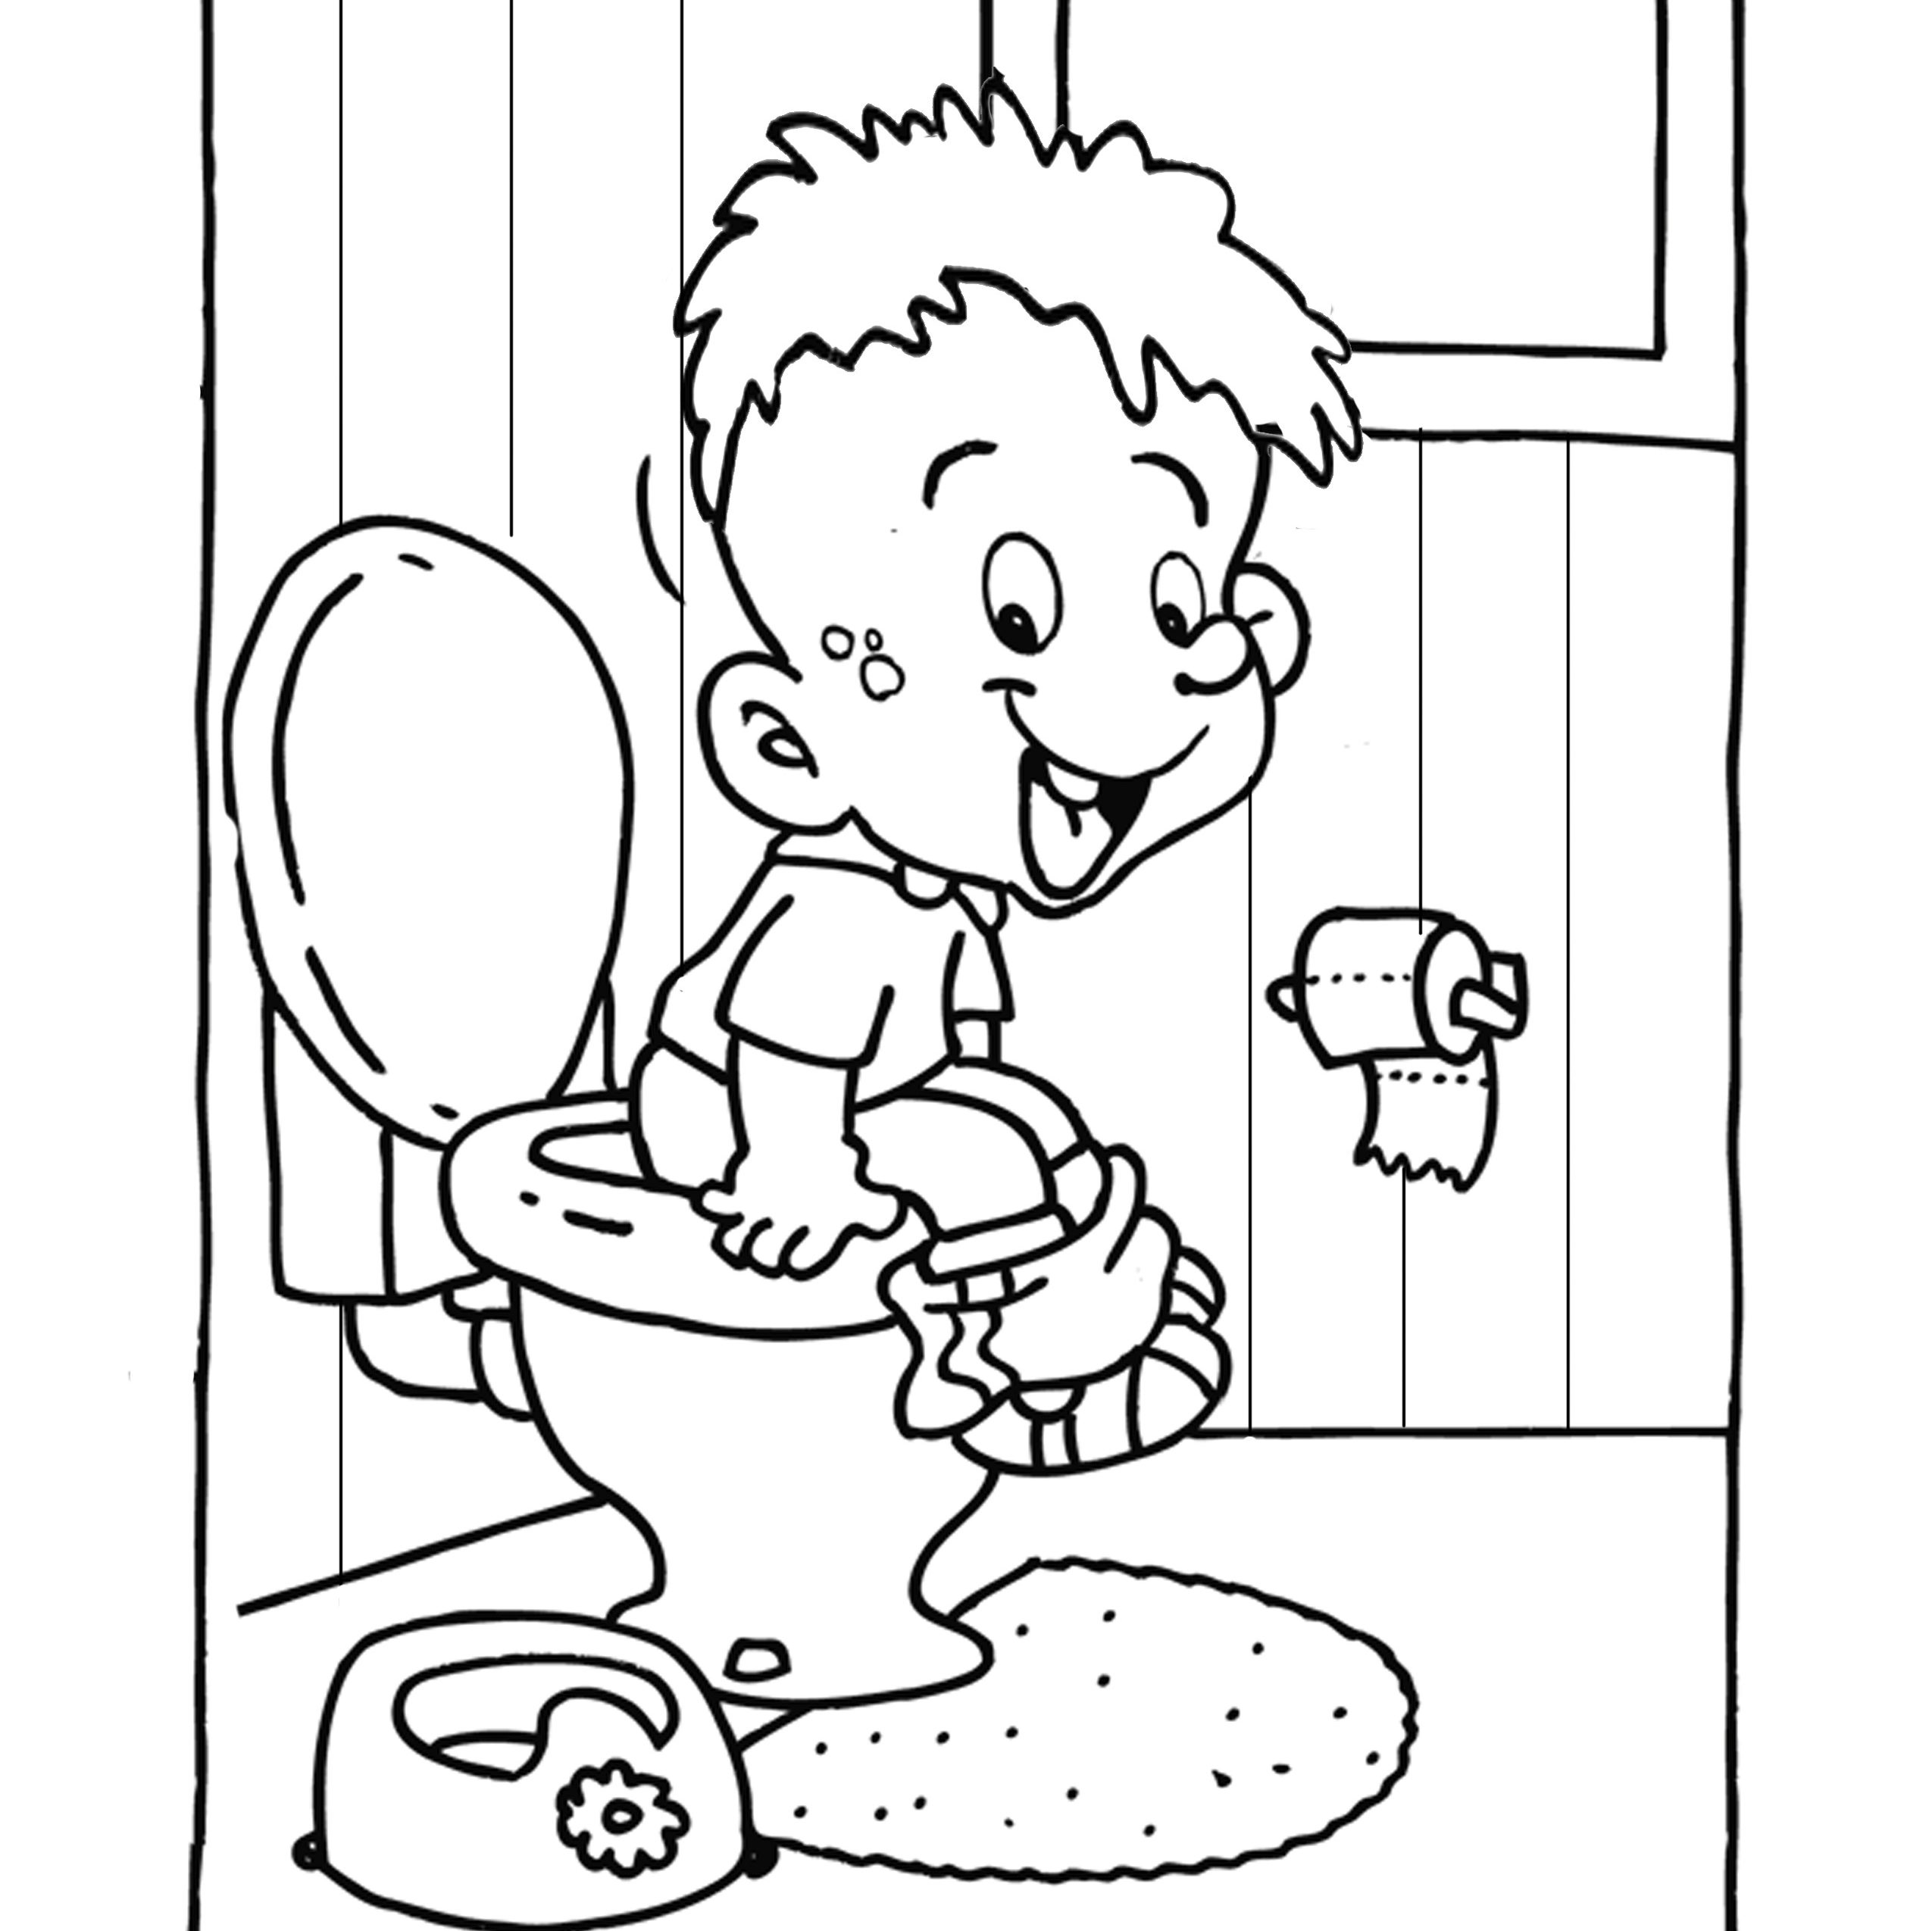 A child sits on a commode and smiles at this coloring page